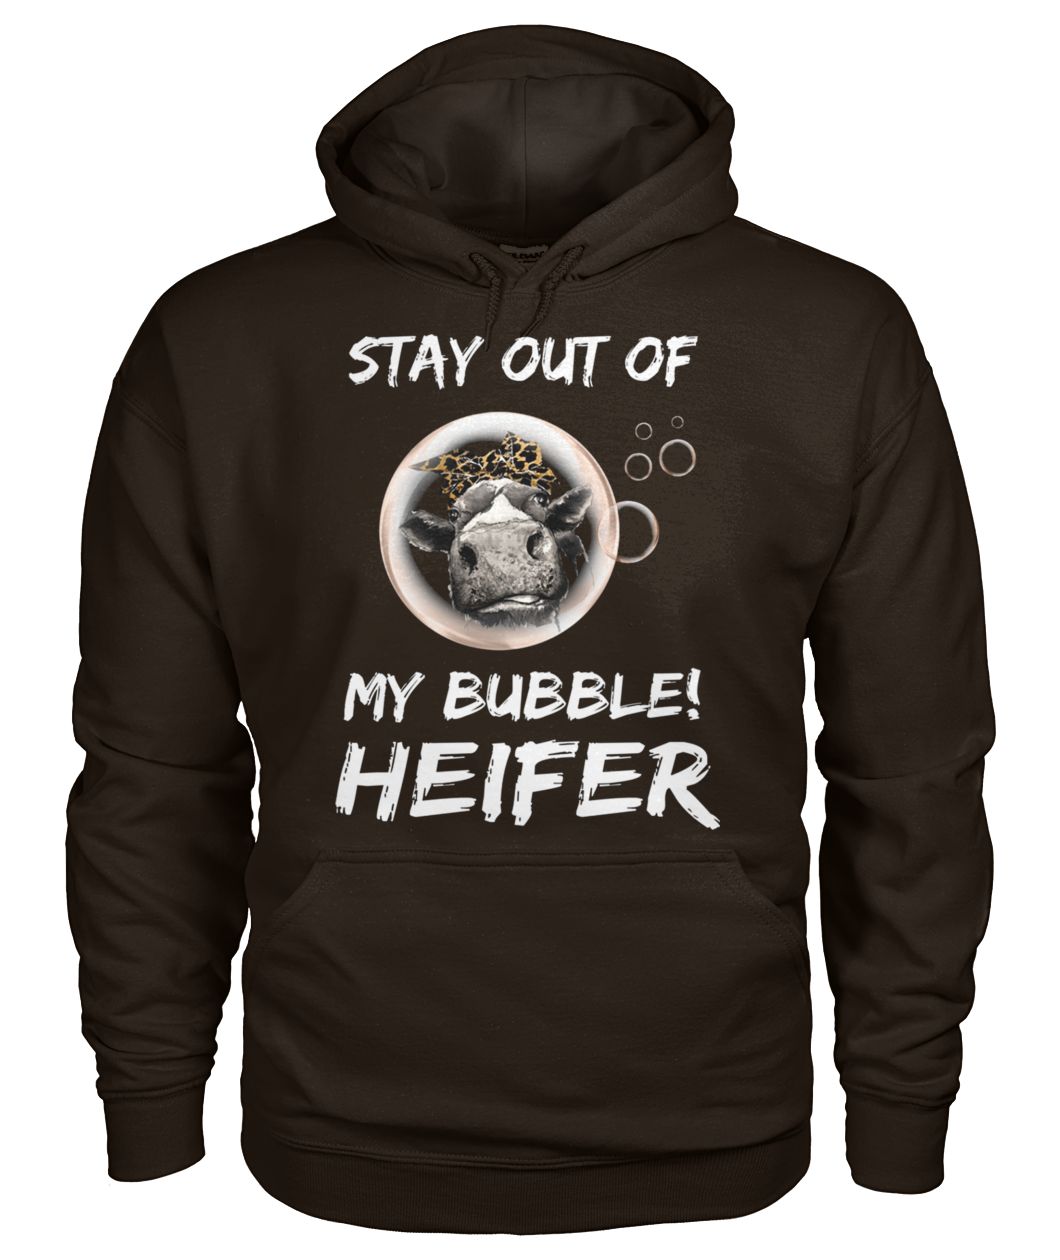 Stay out of my bubble heifer gildan hoodie